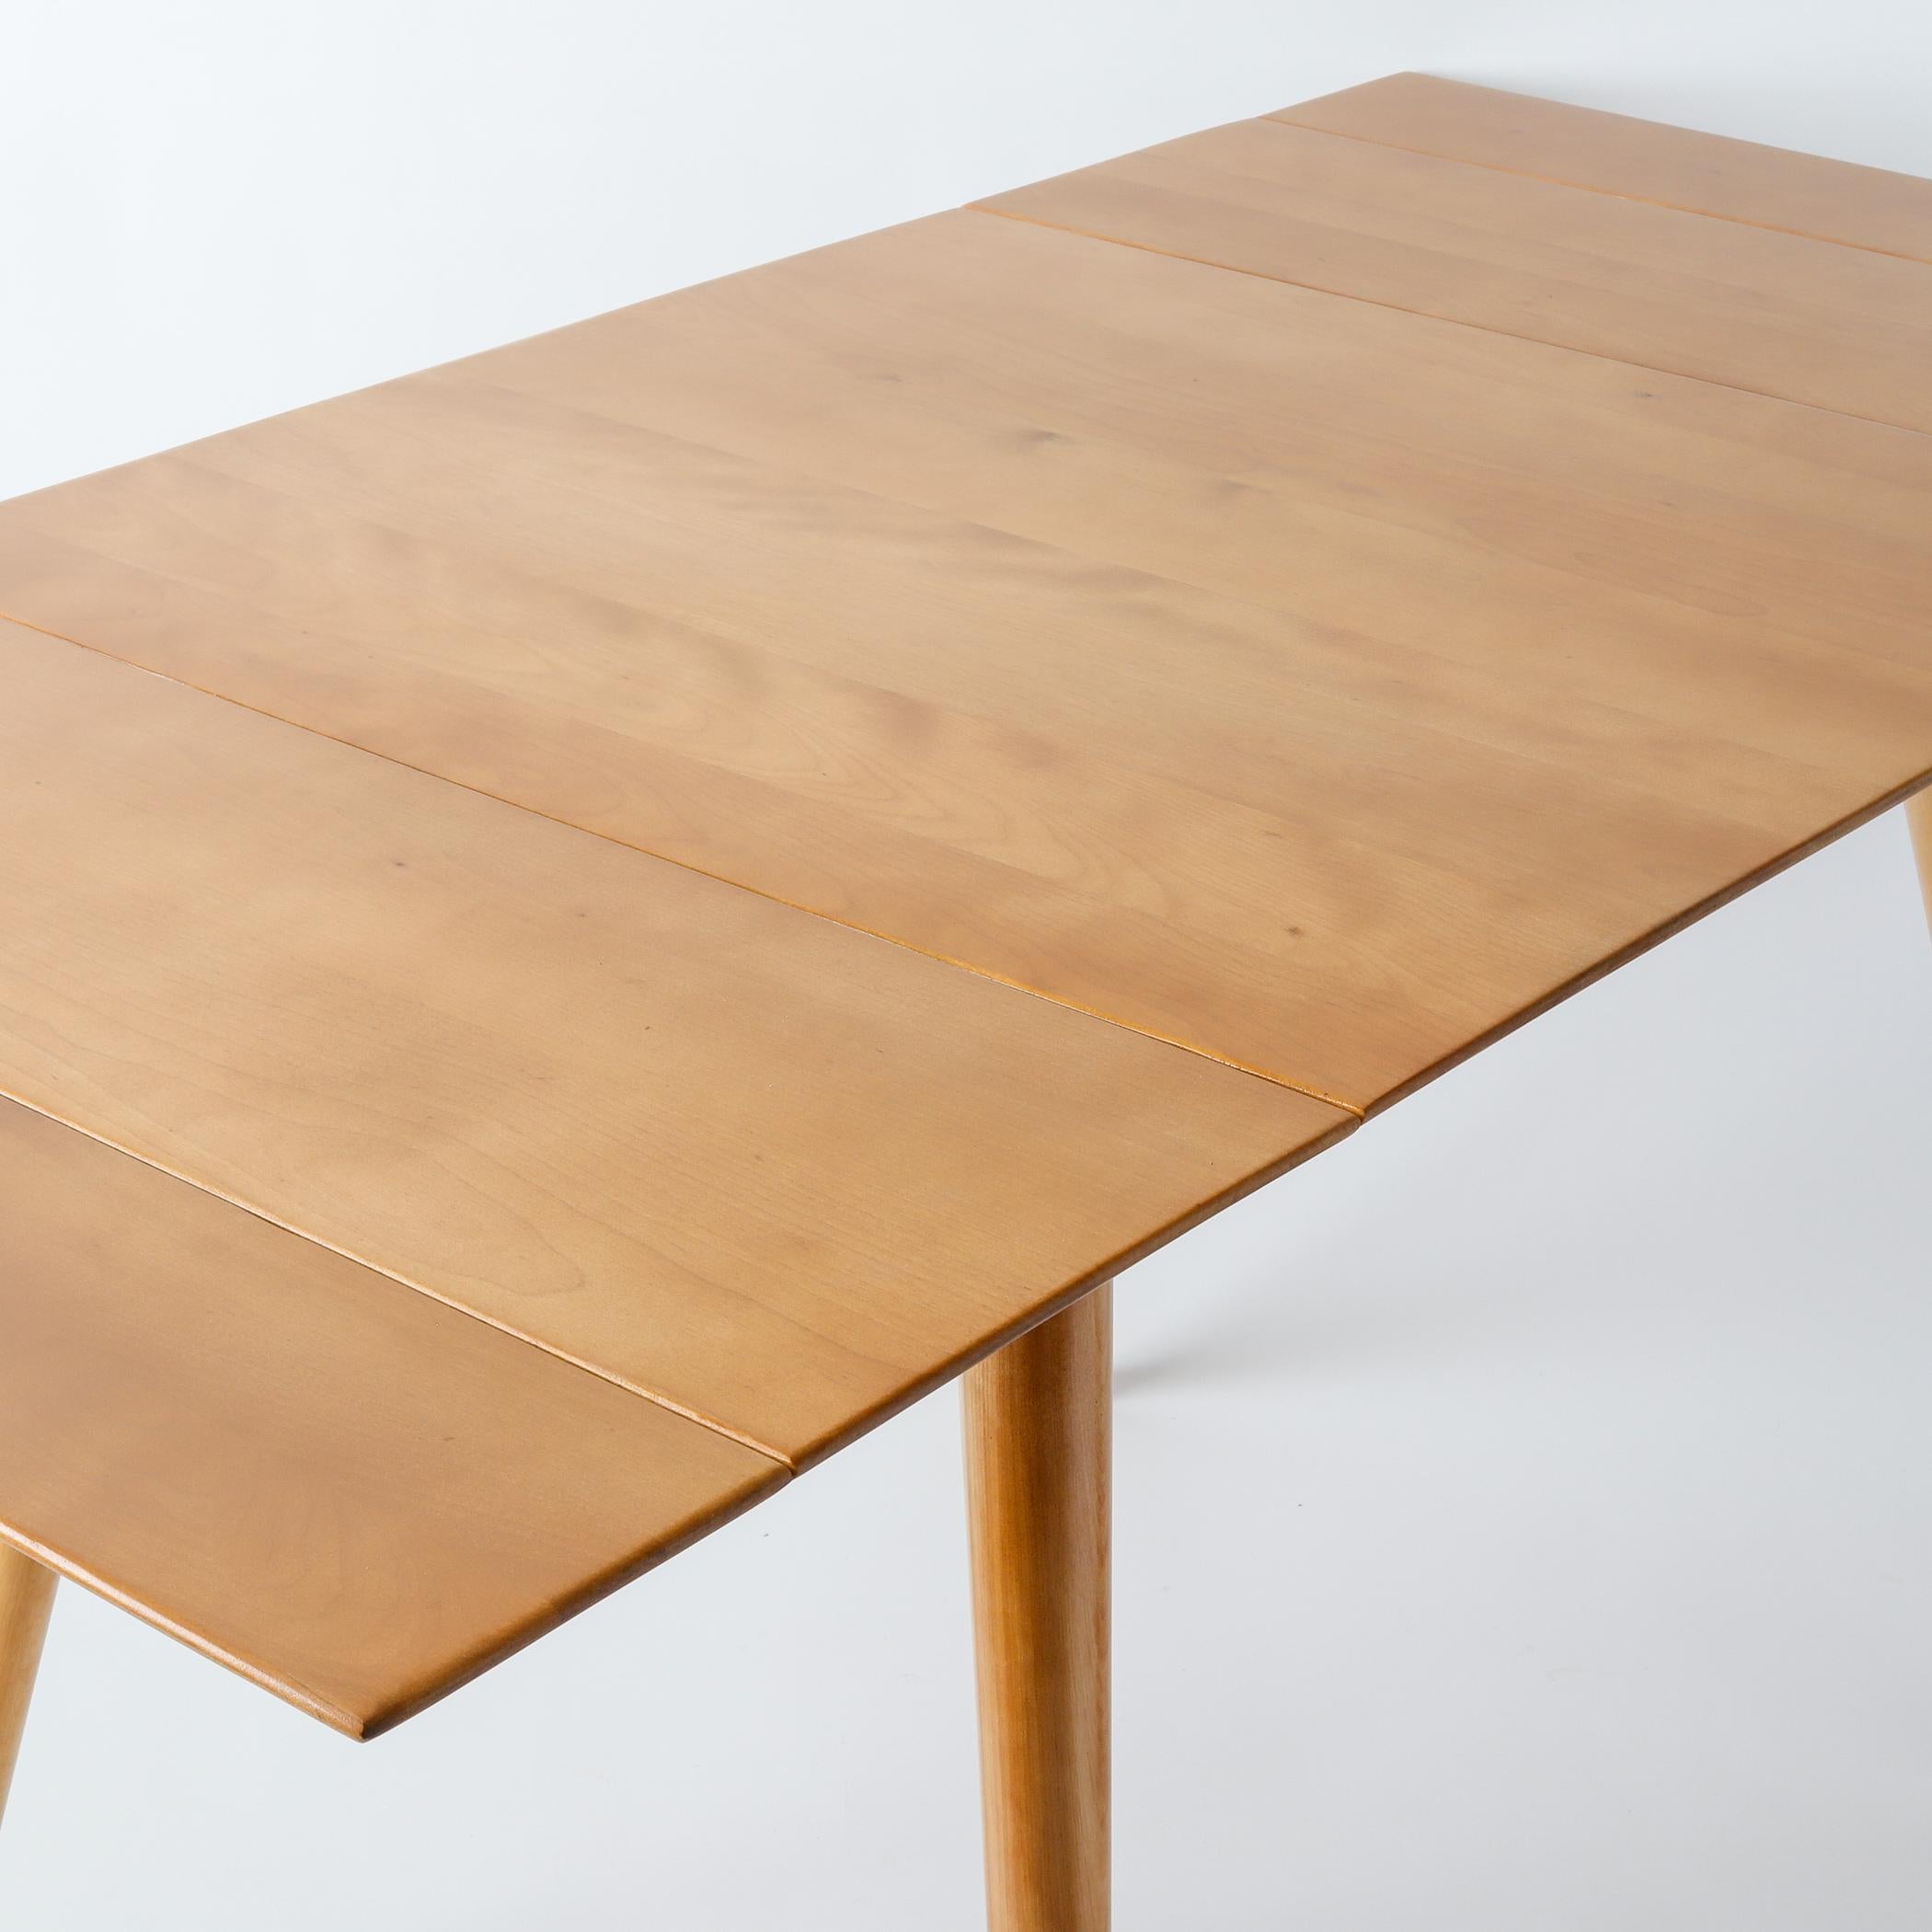 Mid-20th Century Paul McCobb Planner Group Maple Dining Table with Two Leaves, 1950s - Breakfast 